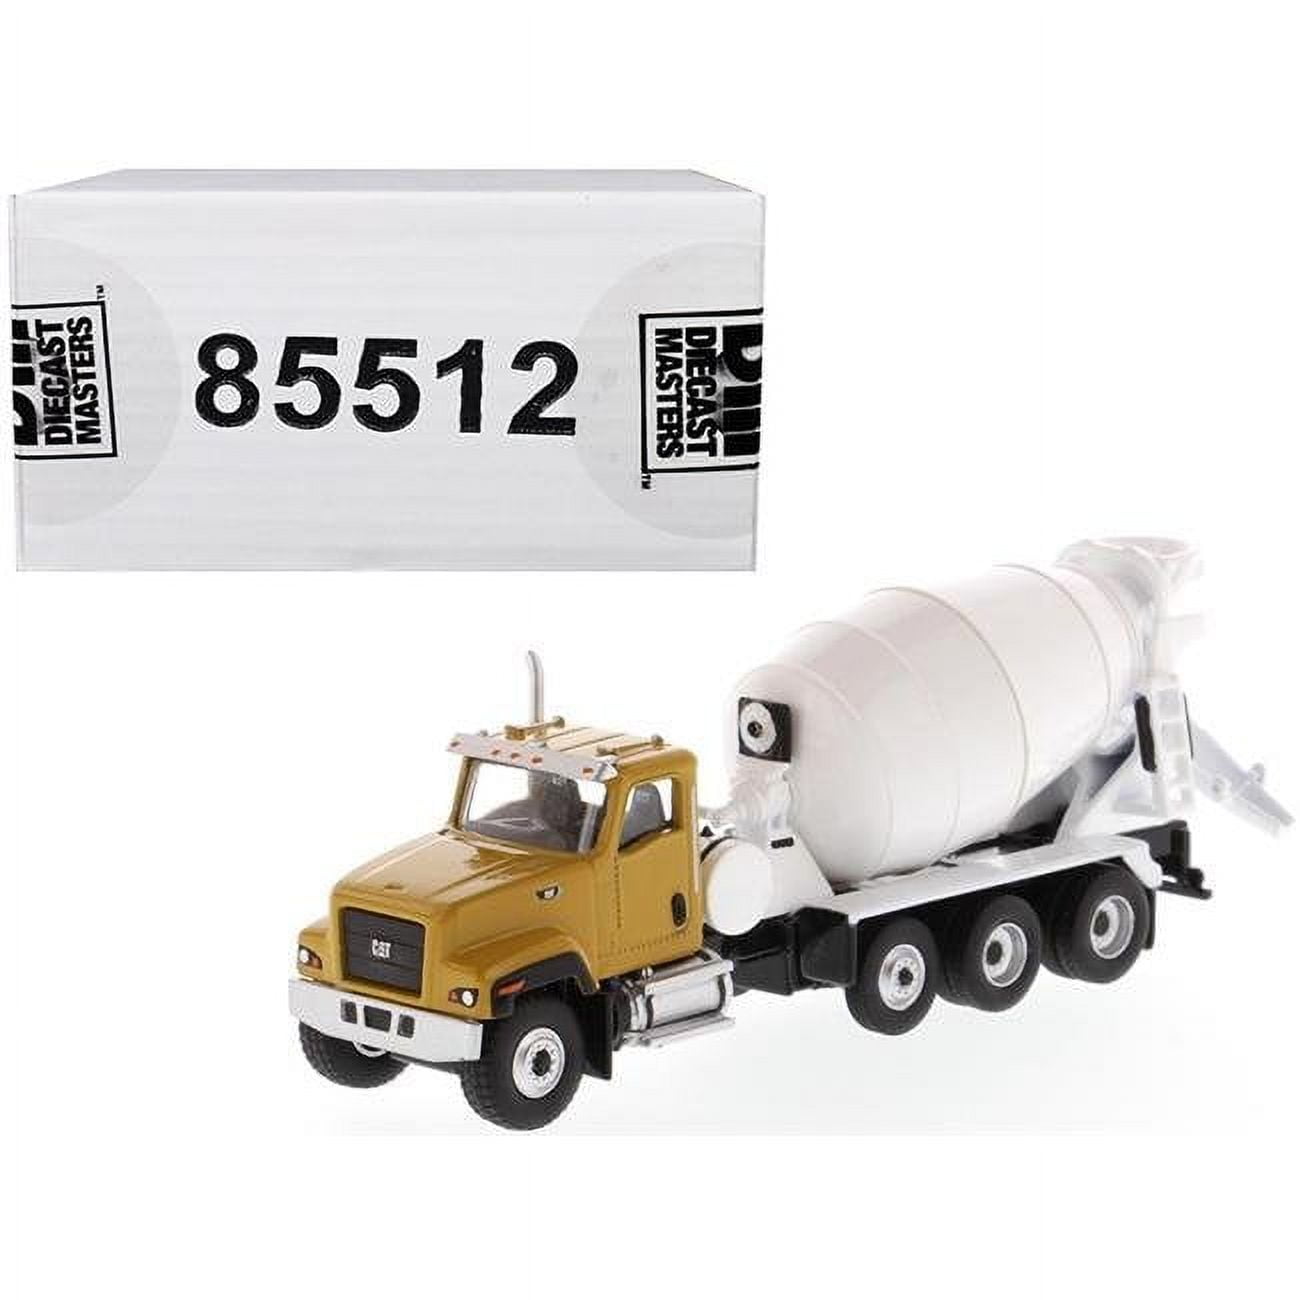 85512 Cat Caterpillar Ct681 Concrete Mixer High Line Series 1 By 87 Ho Scale Diecast Model, Yellow & White